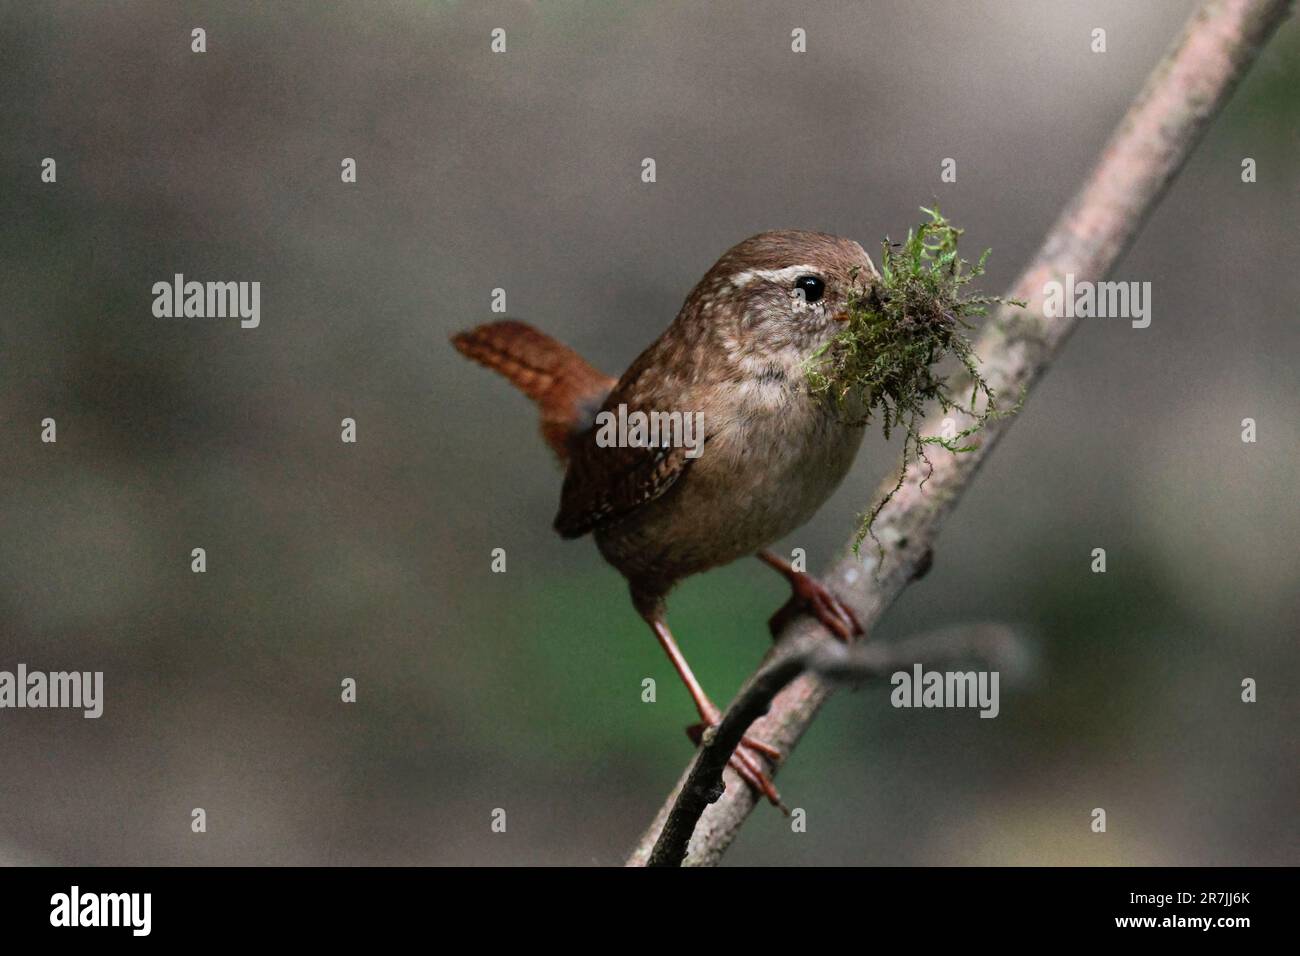 Wren Troglodytes x2, small reddish brown bird usually has short cocked finely barred tail and wings fine bill pale stripe over eyes, nesting material Stock Photo